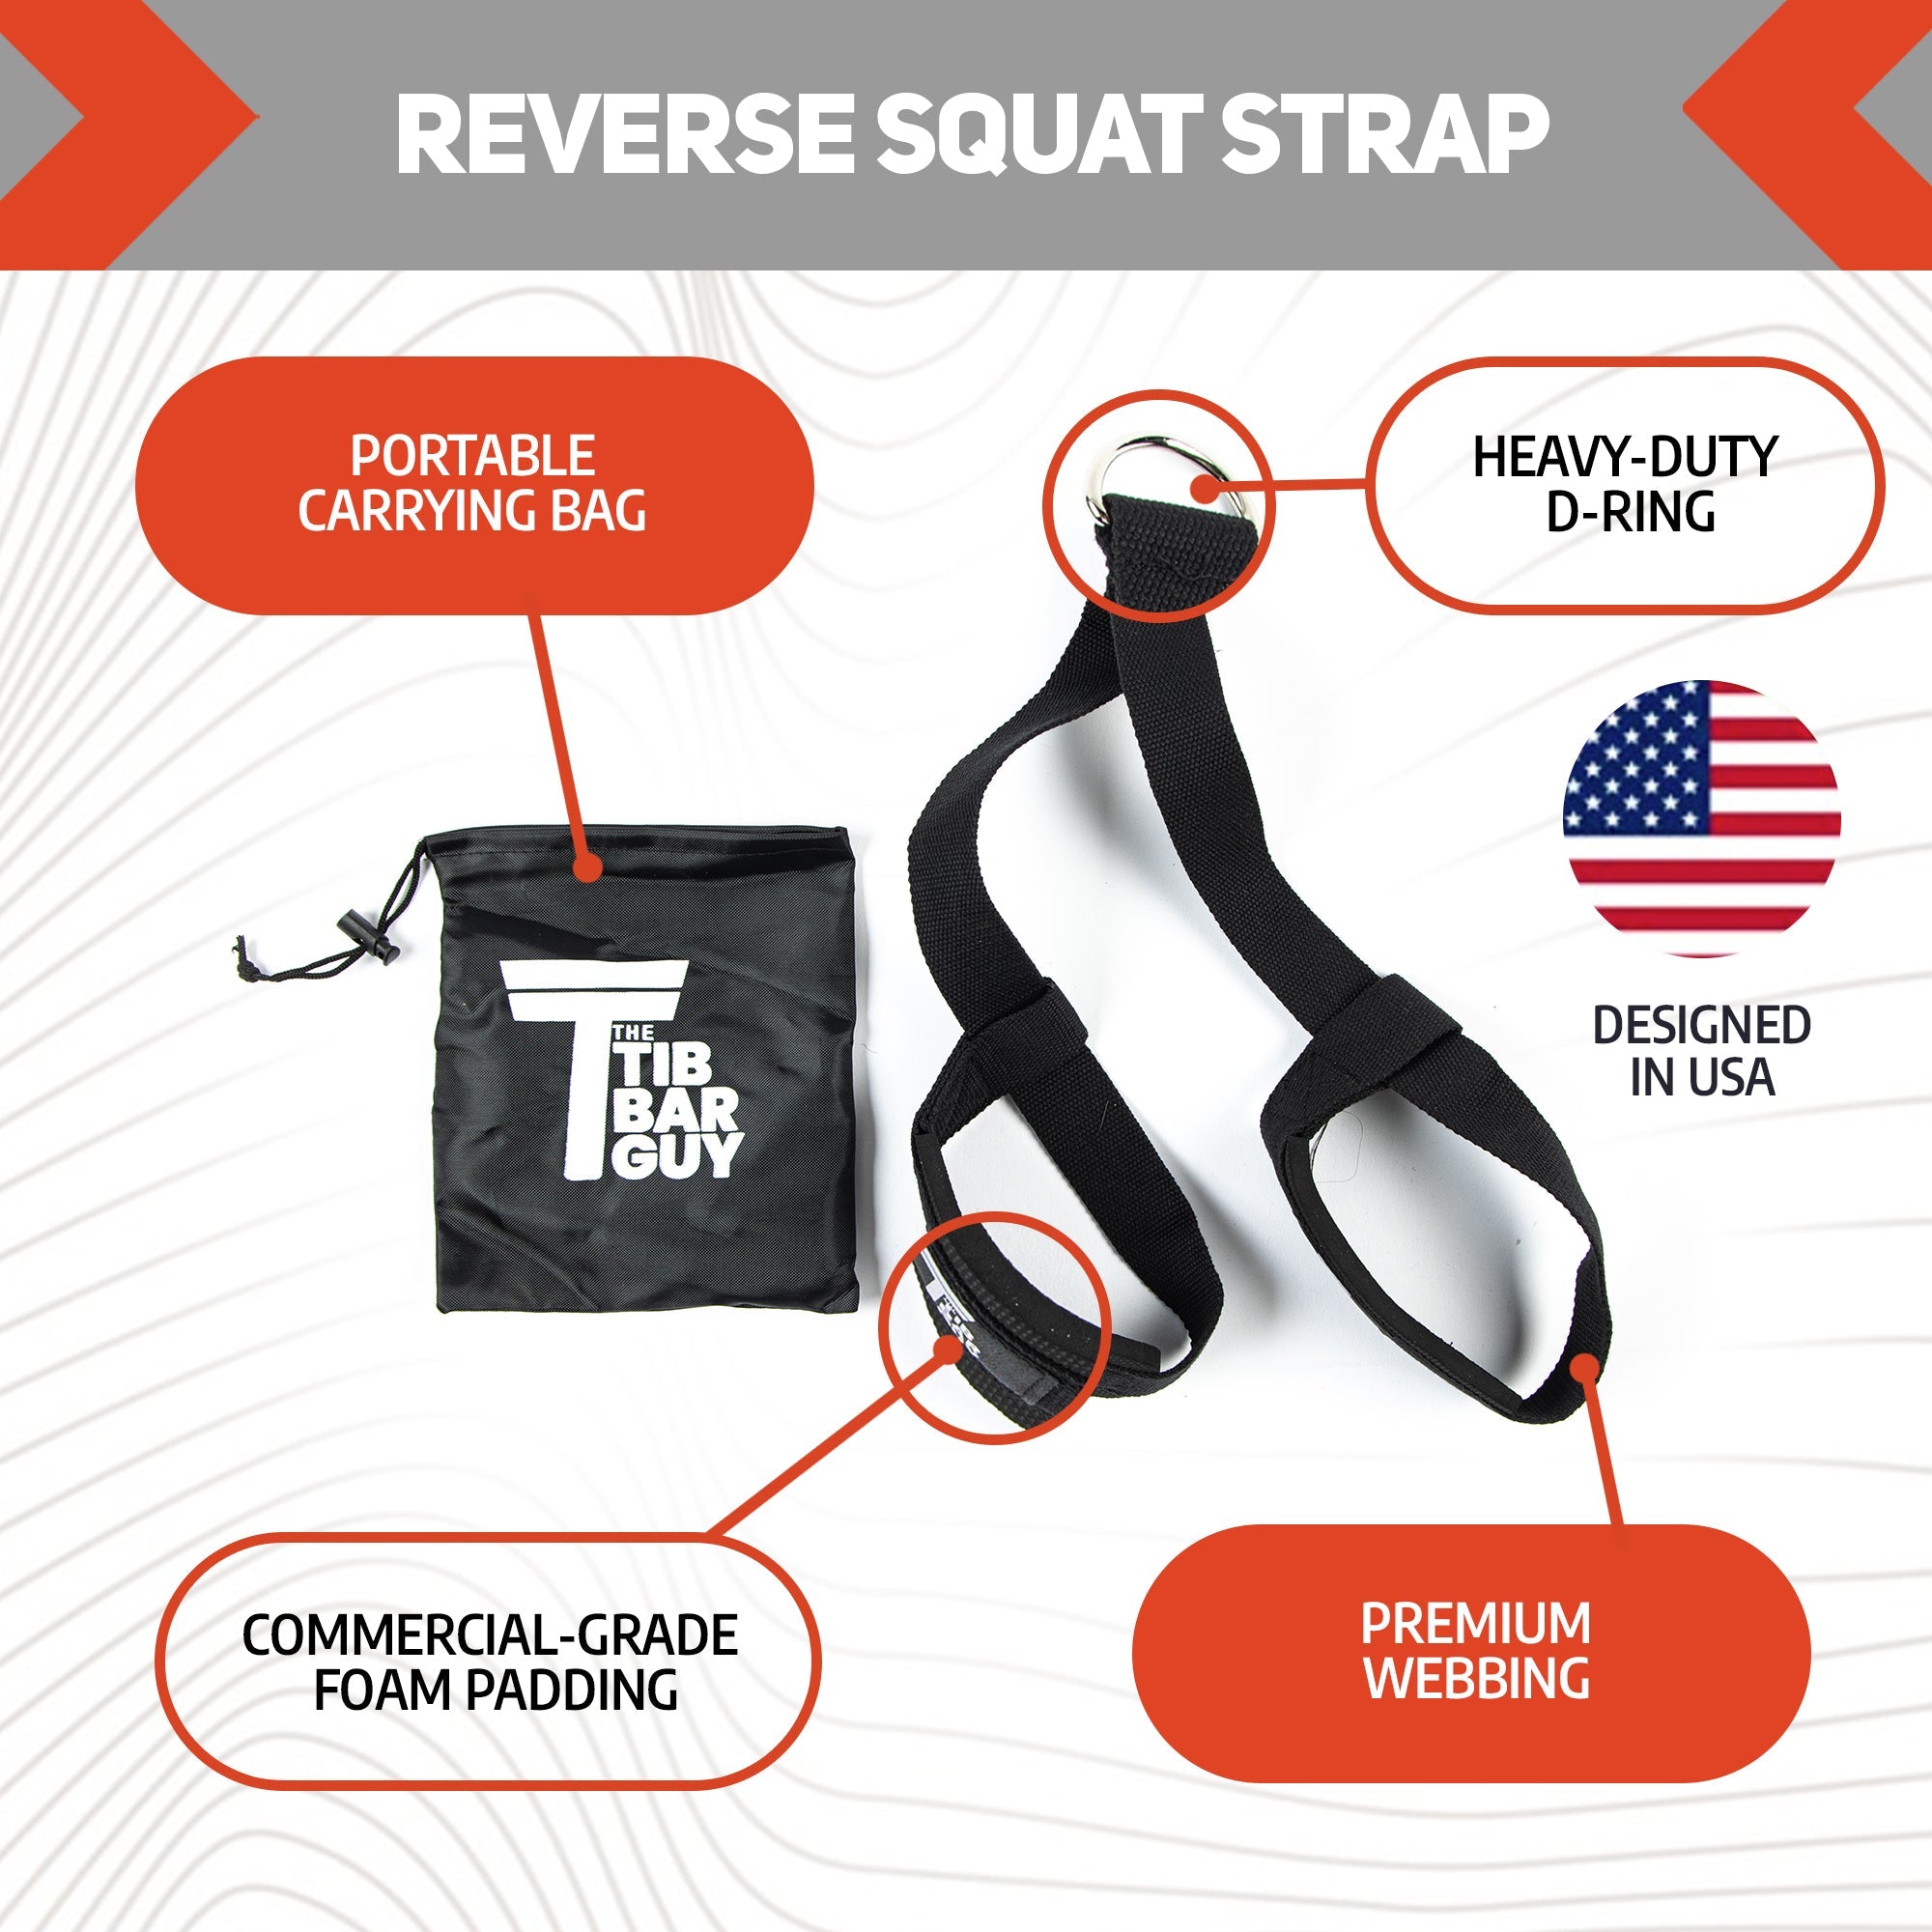 What Is Included In The Reverse Squat Strap Set | The Tib Bar Guy